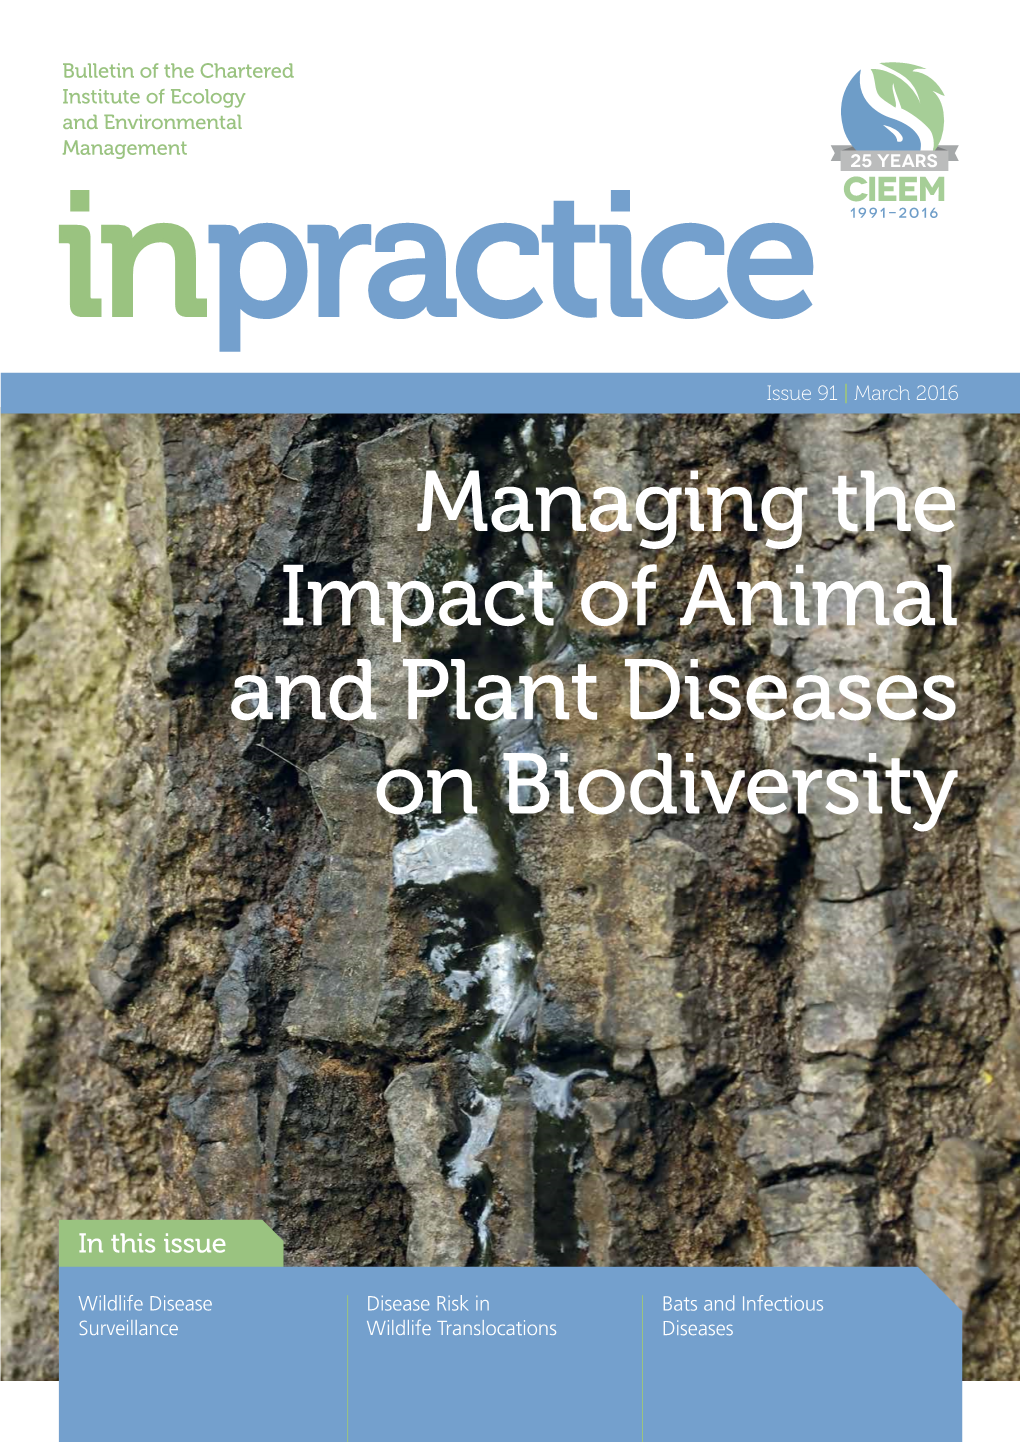 Managing the Impact of Animal and Plant Diseases on Biodiversity